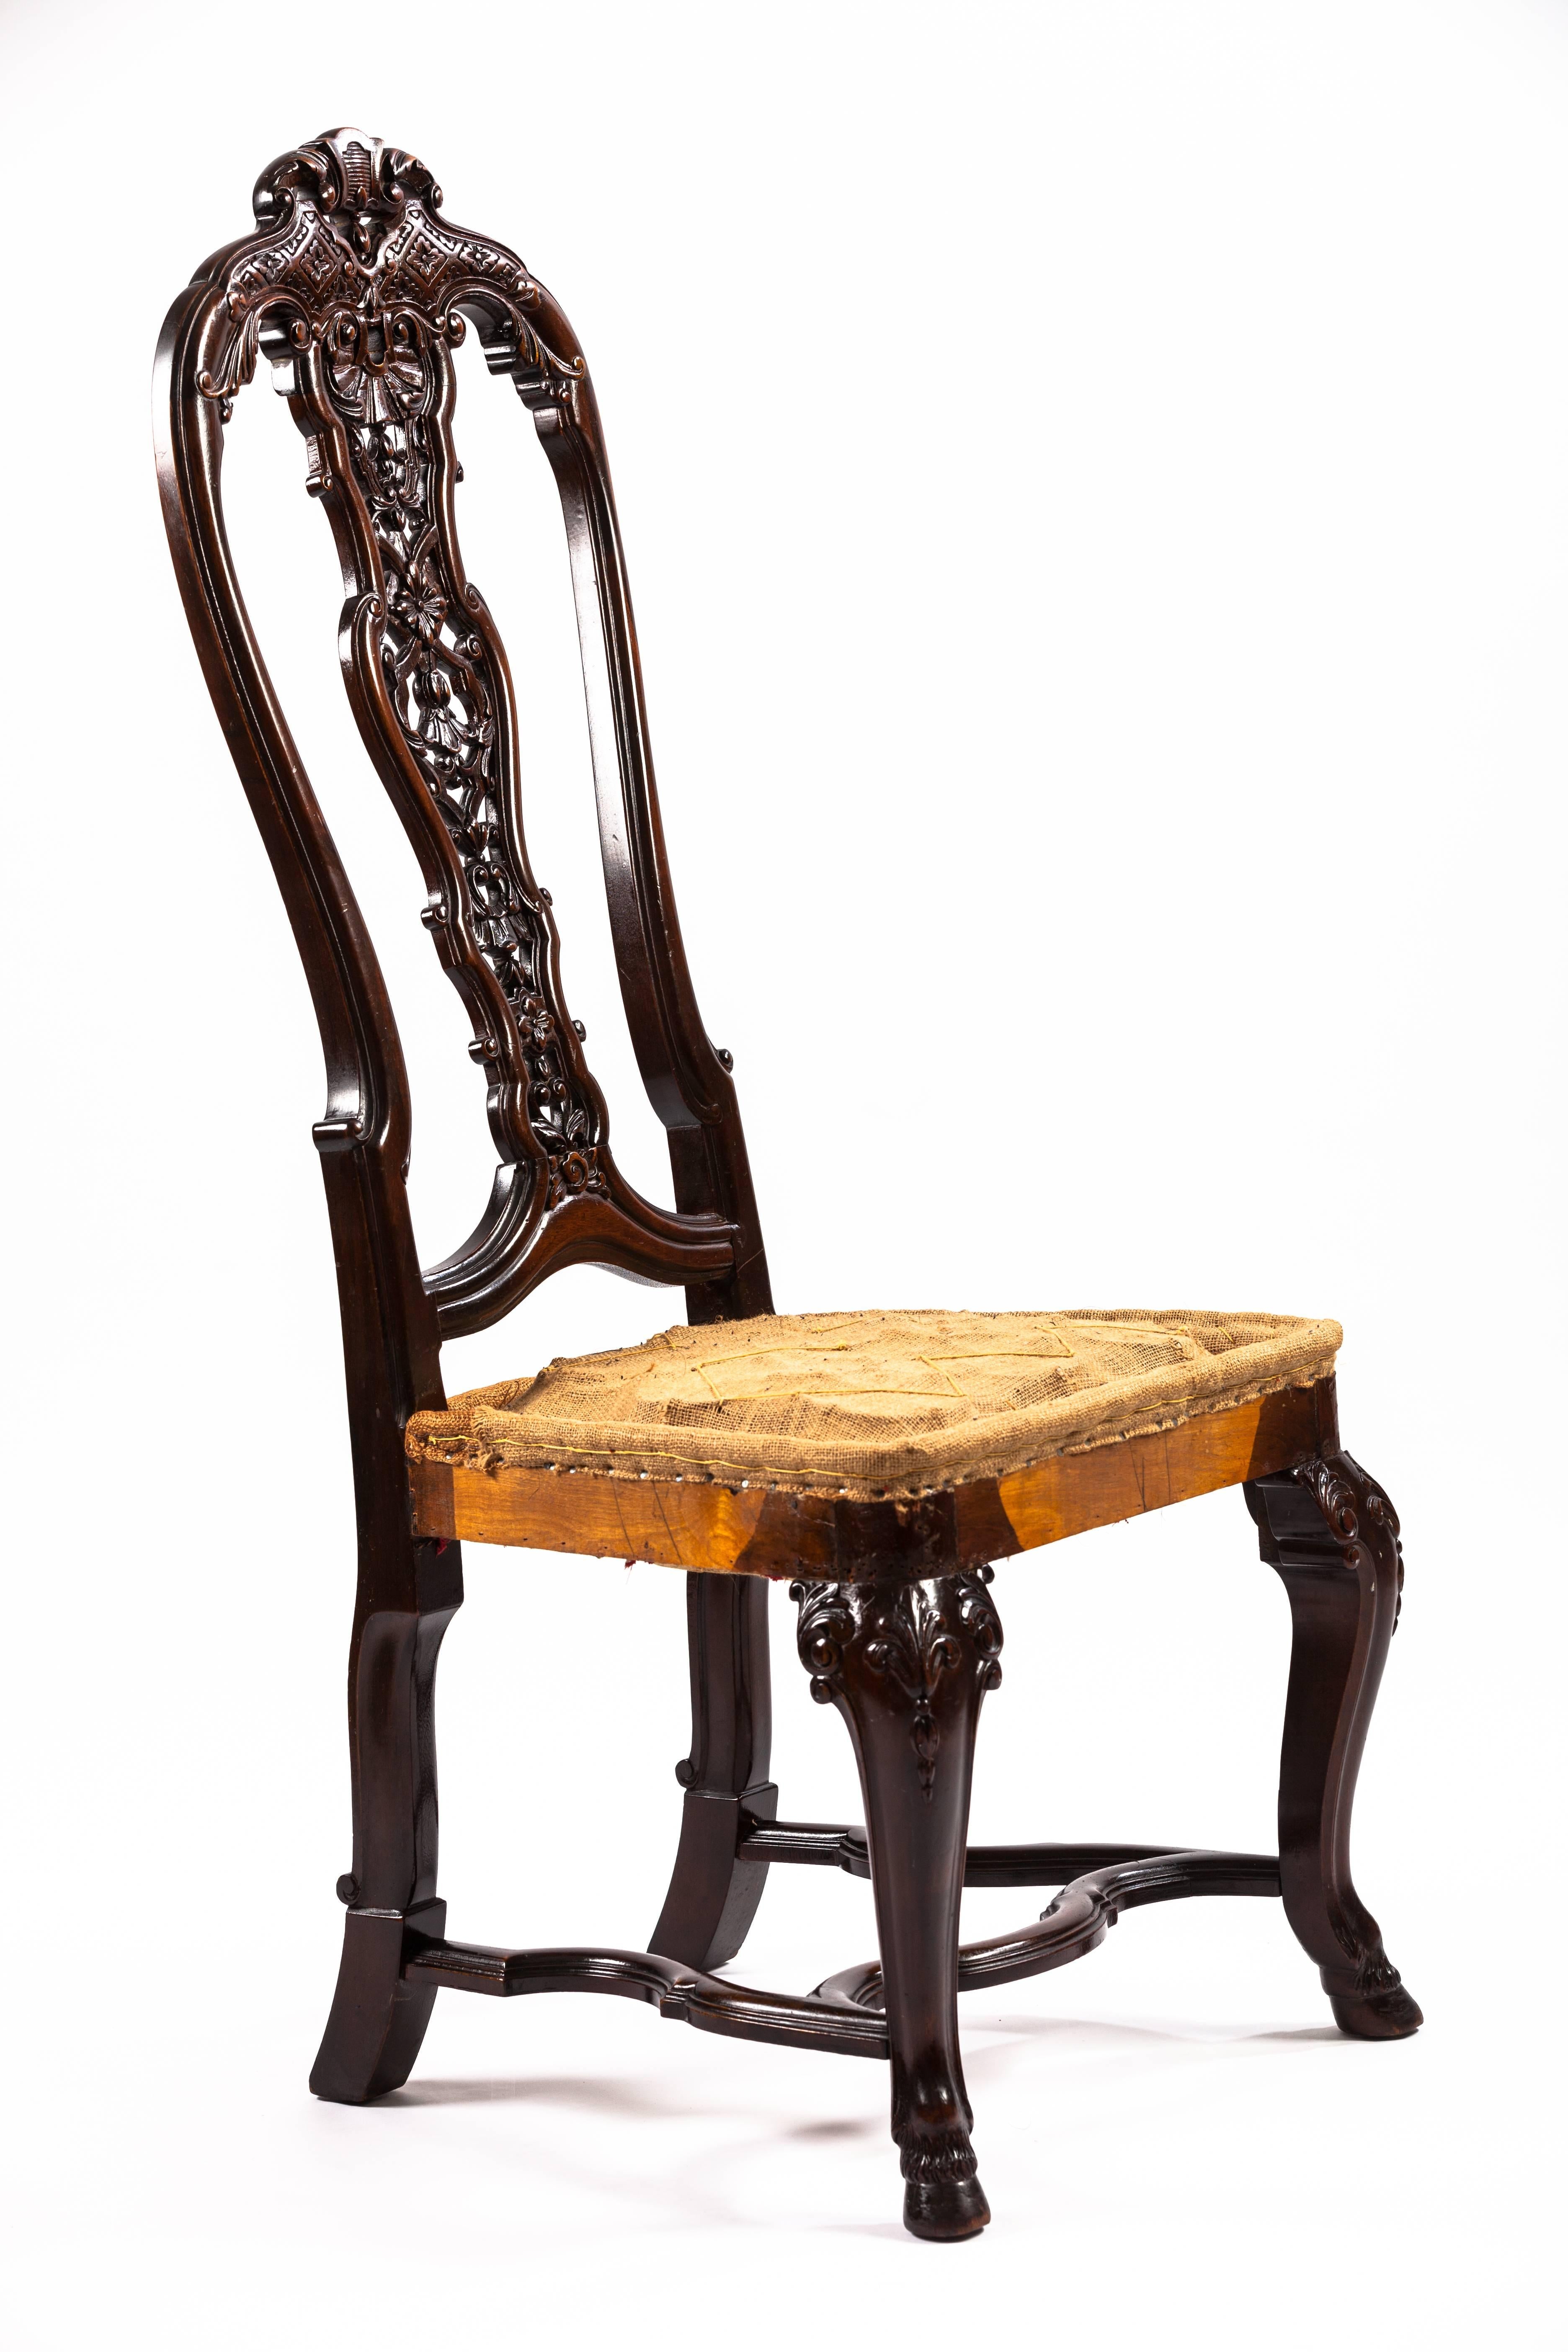 Portuguese Rococo style mahogany side chair.

Intricately carved. Ready for new upholstery.